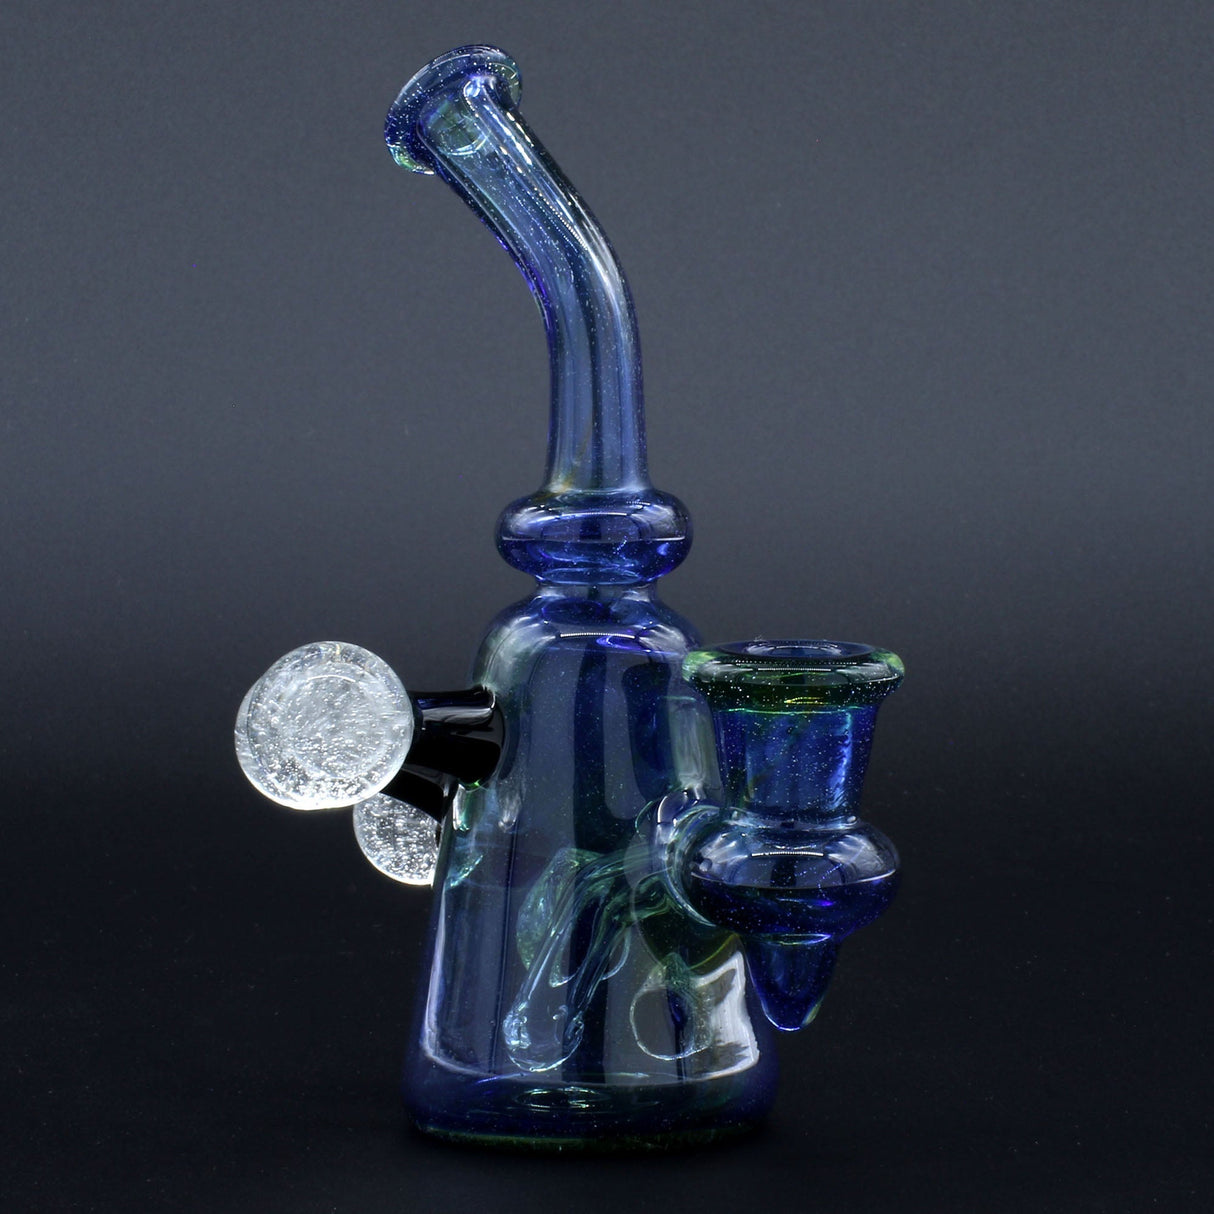 Clayball Glass "Super Nova" Heady Sherlock Dab Rig with intricate design, front view on black background